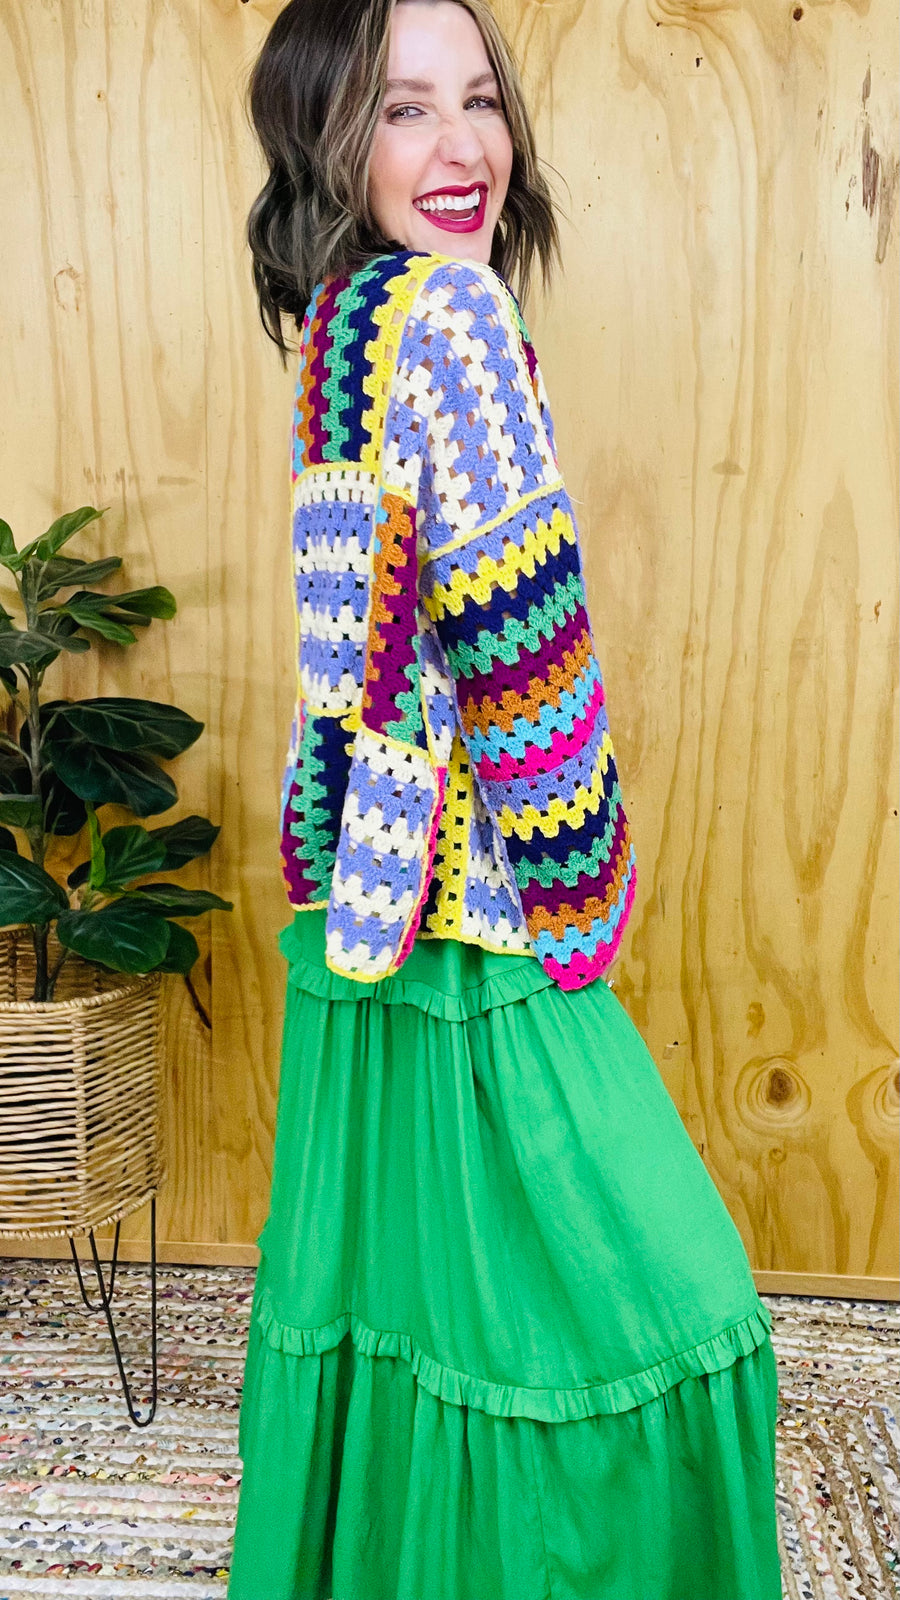 Crochet Of Many Colors Cropped Cardigan